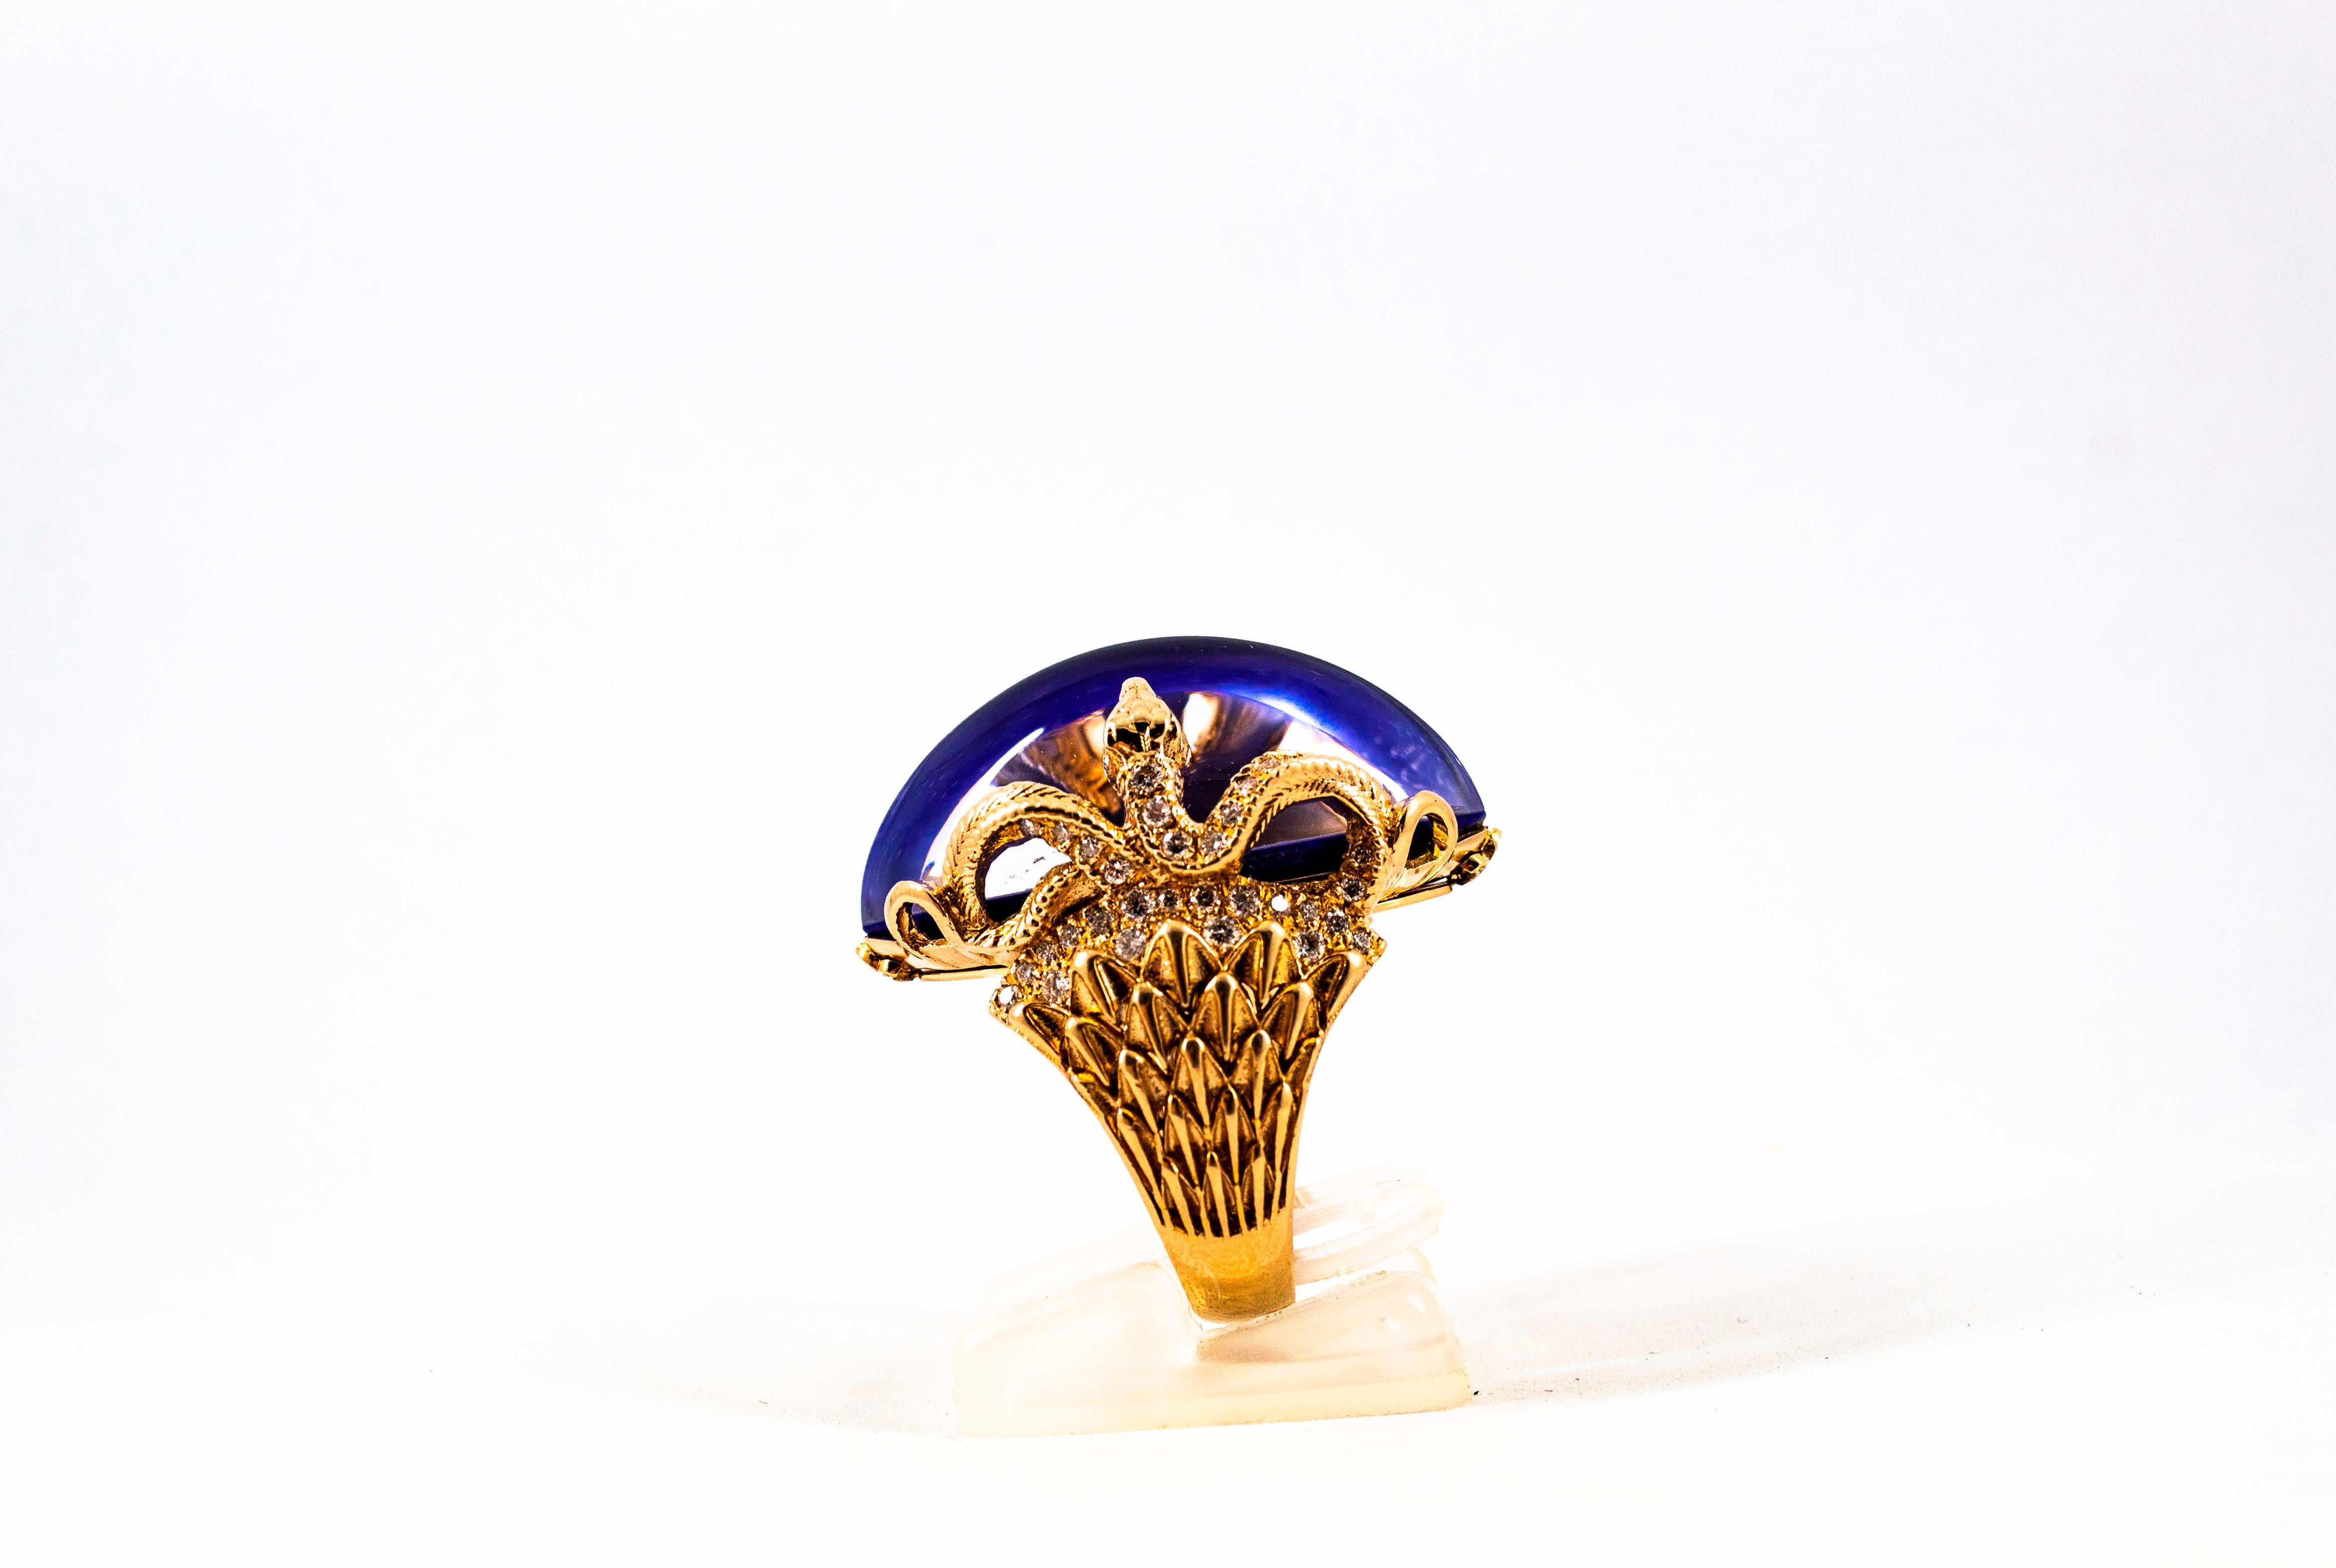 This Ring is made of 14K Yellow Gold.
This Ring is available also in White Gold or in 18K Yellow (Or White) Gold.
This Ring has 0.76 Carats of White Modern Round Cut Diamonds.
This Ring has a 36.25 Carats Lapis Lazuli Triplet Stone: the stone is